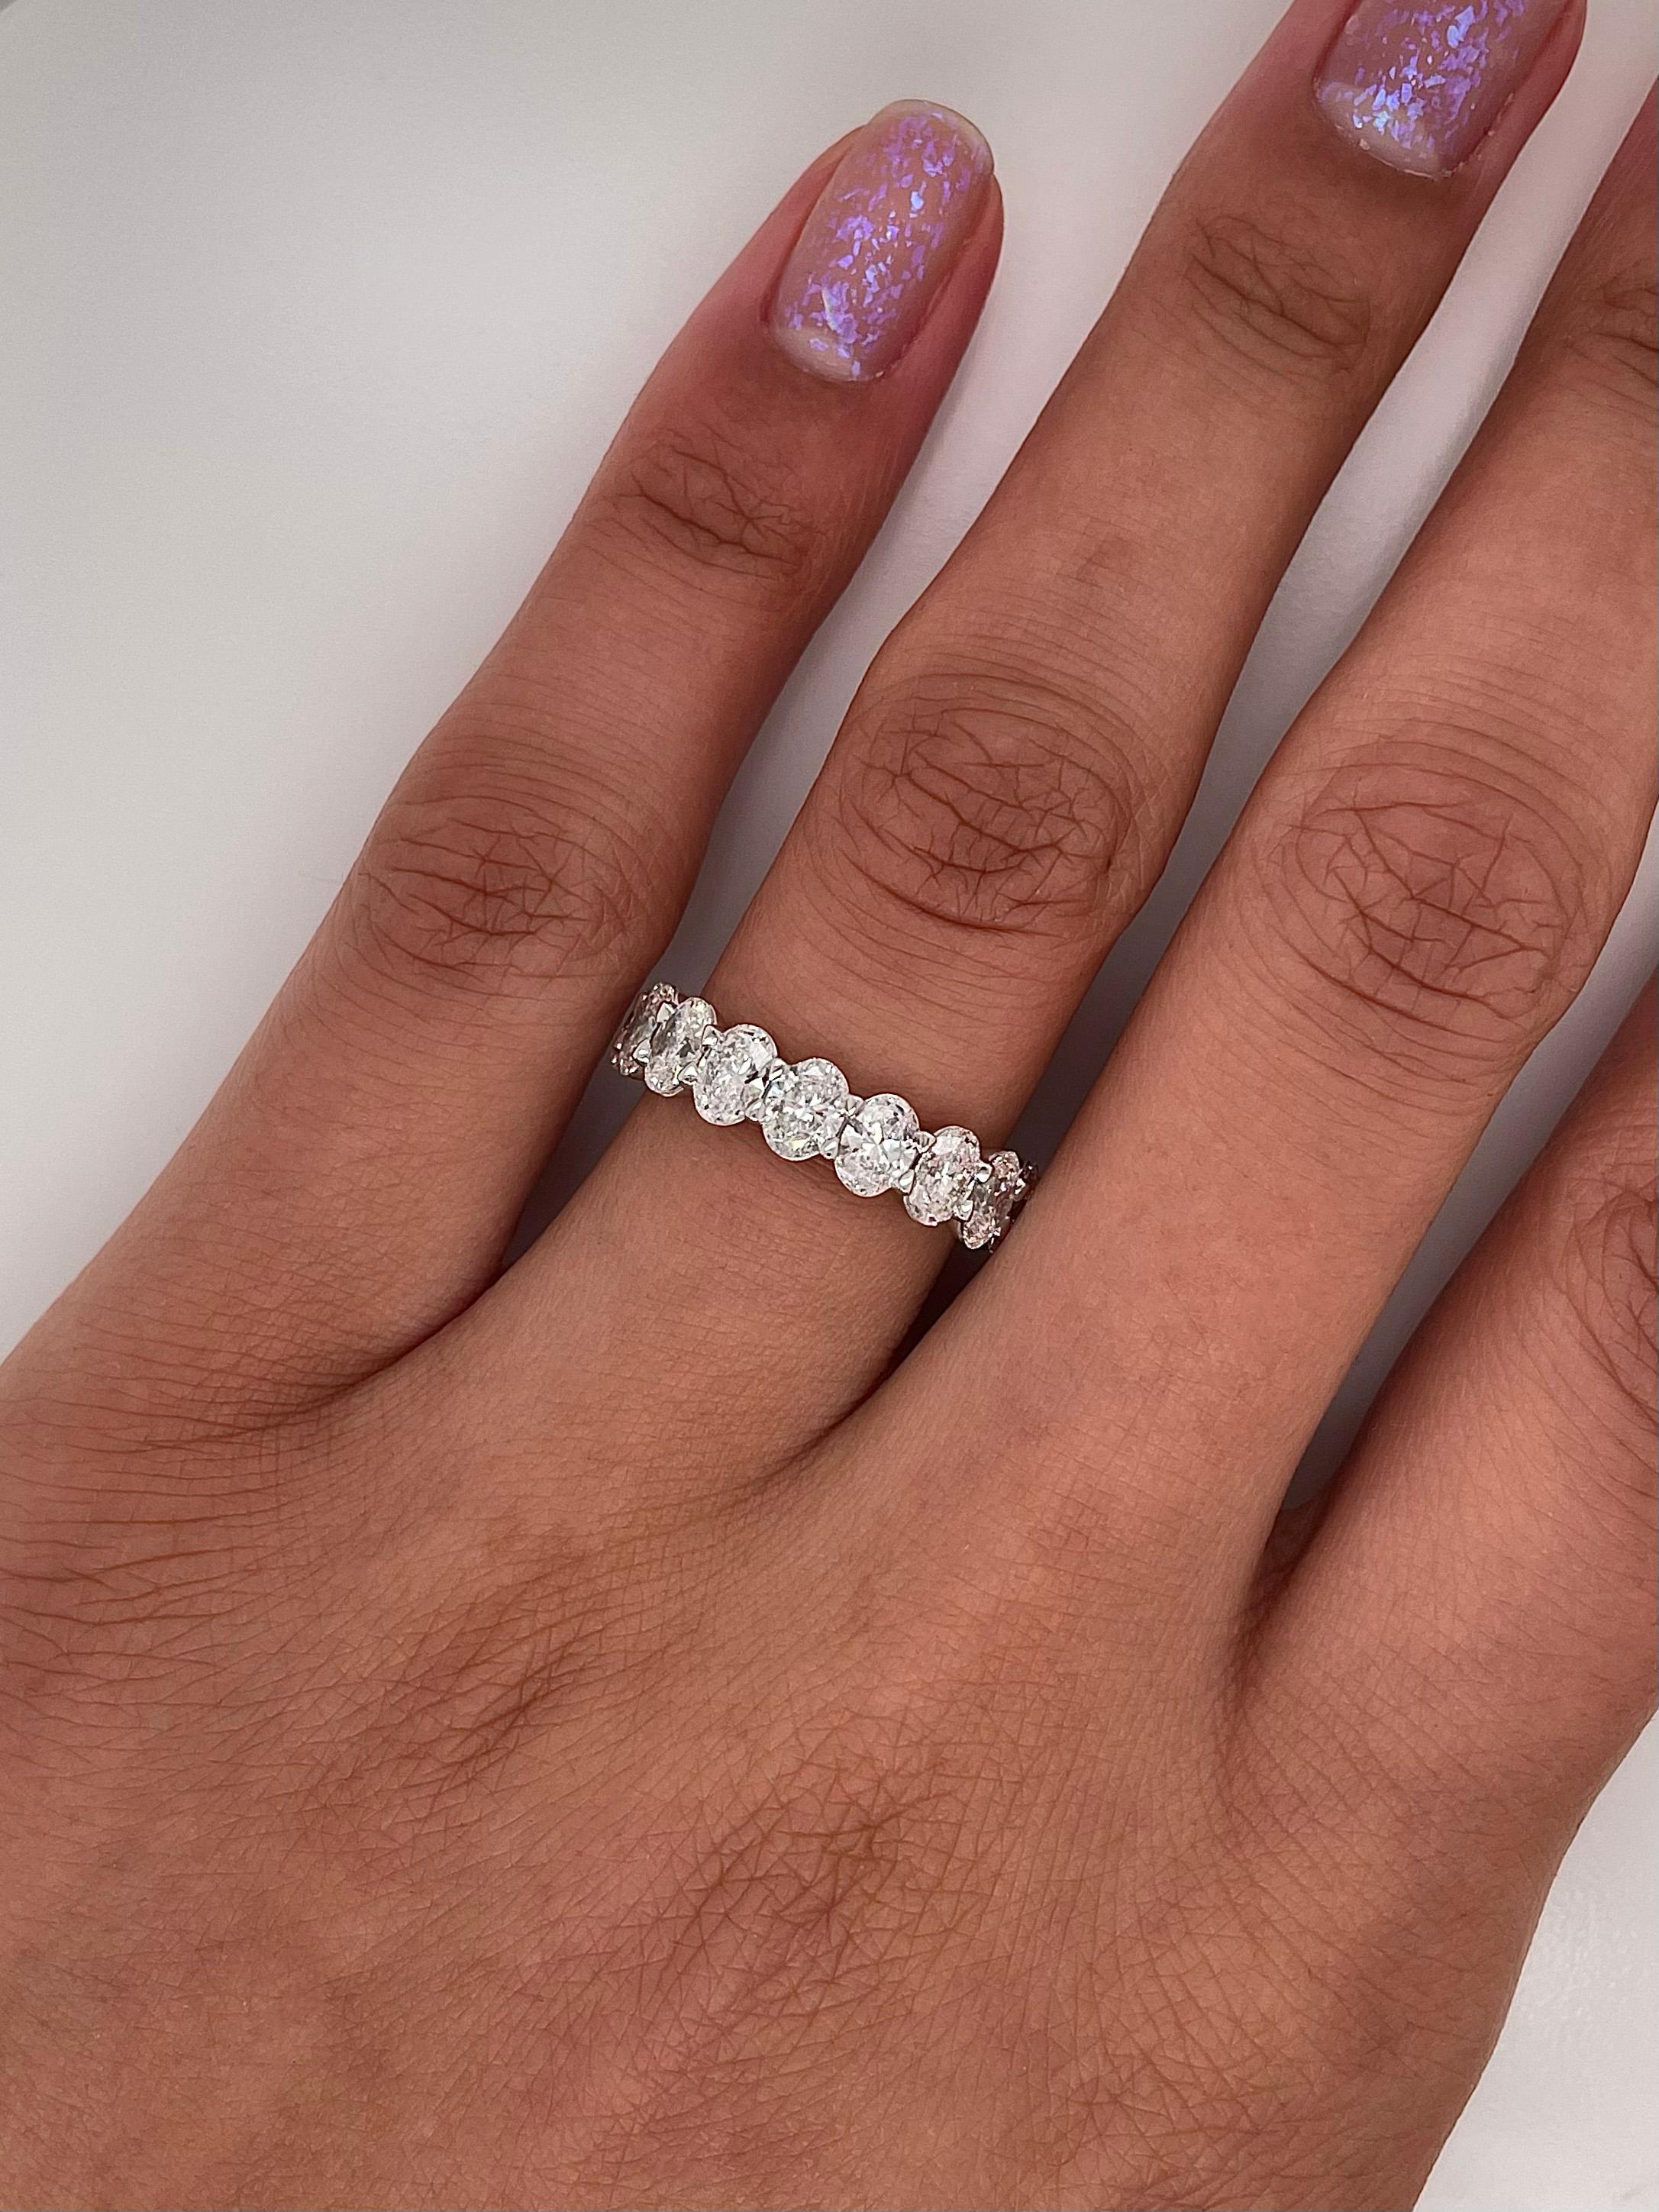 Ladies diamond Eternity band carries a total of 4.15ct of oval cut diamonds placed in platinum.

Size: 6.0
Color: G
Clarity: VS1

This shared prong style Eternity band was handmade by our jewelers in New York City.